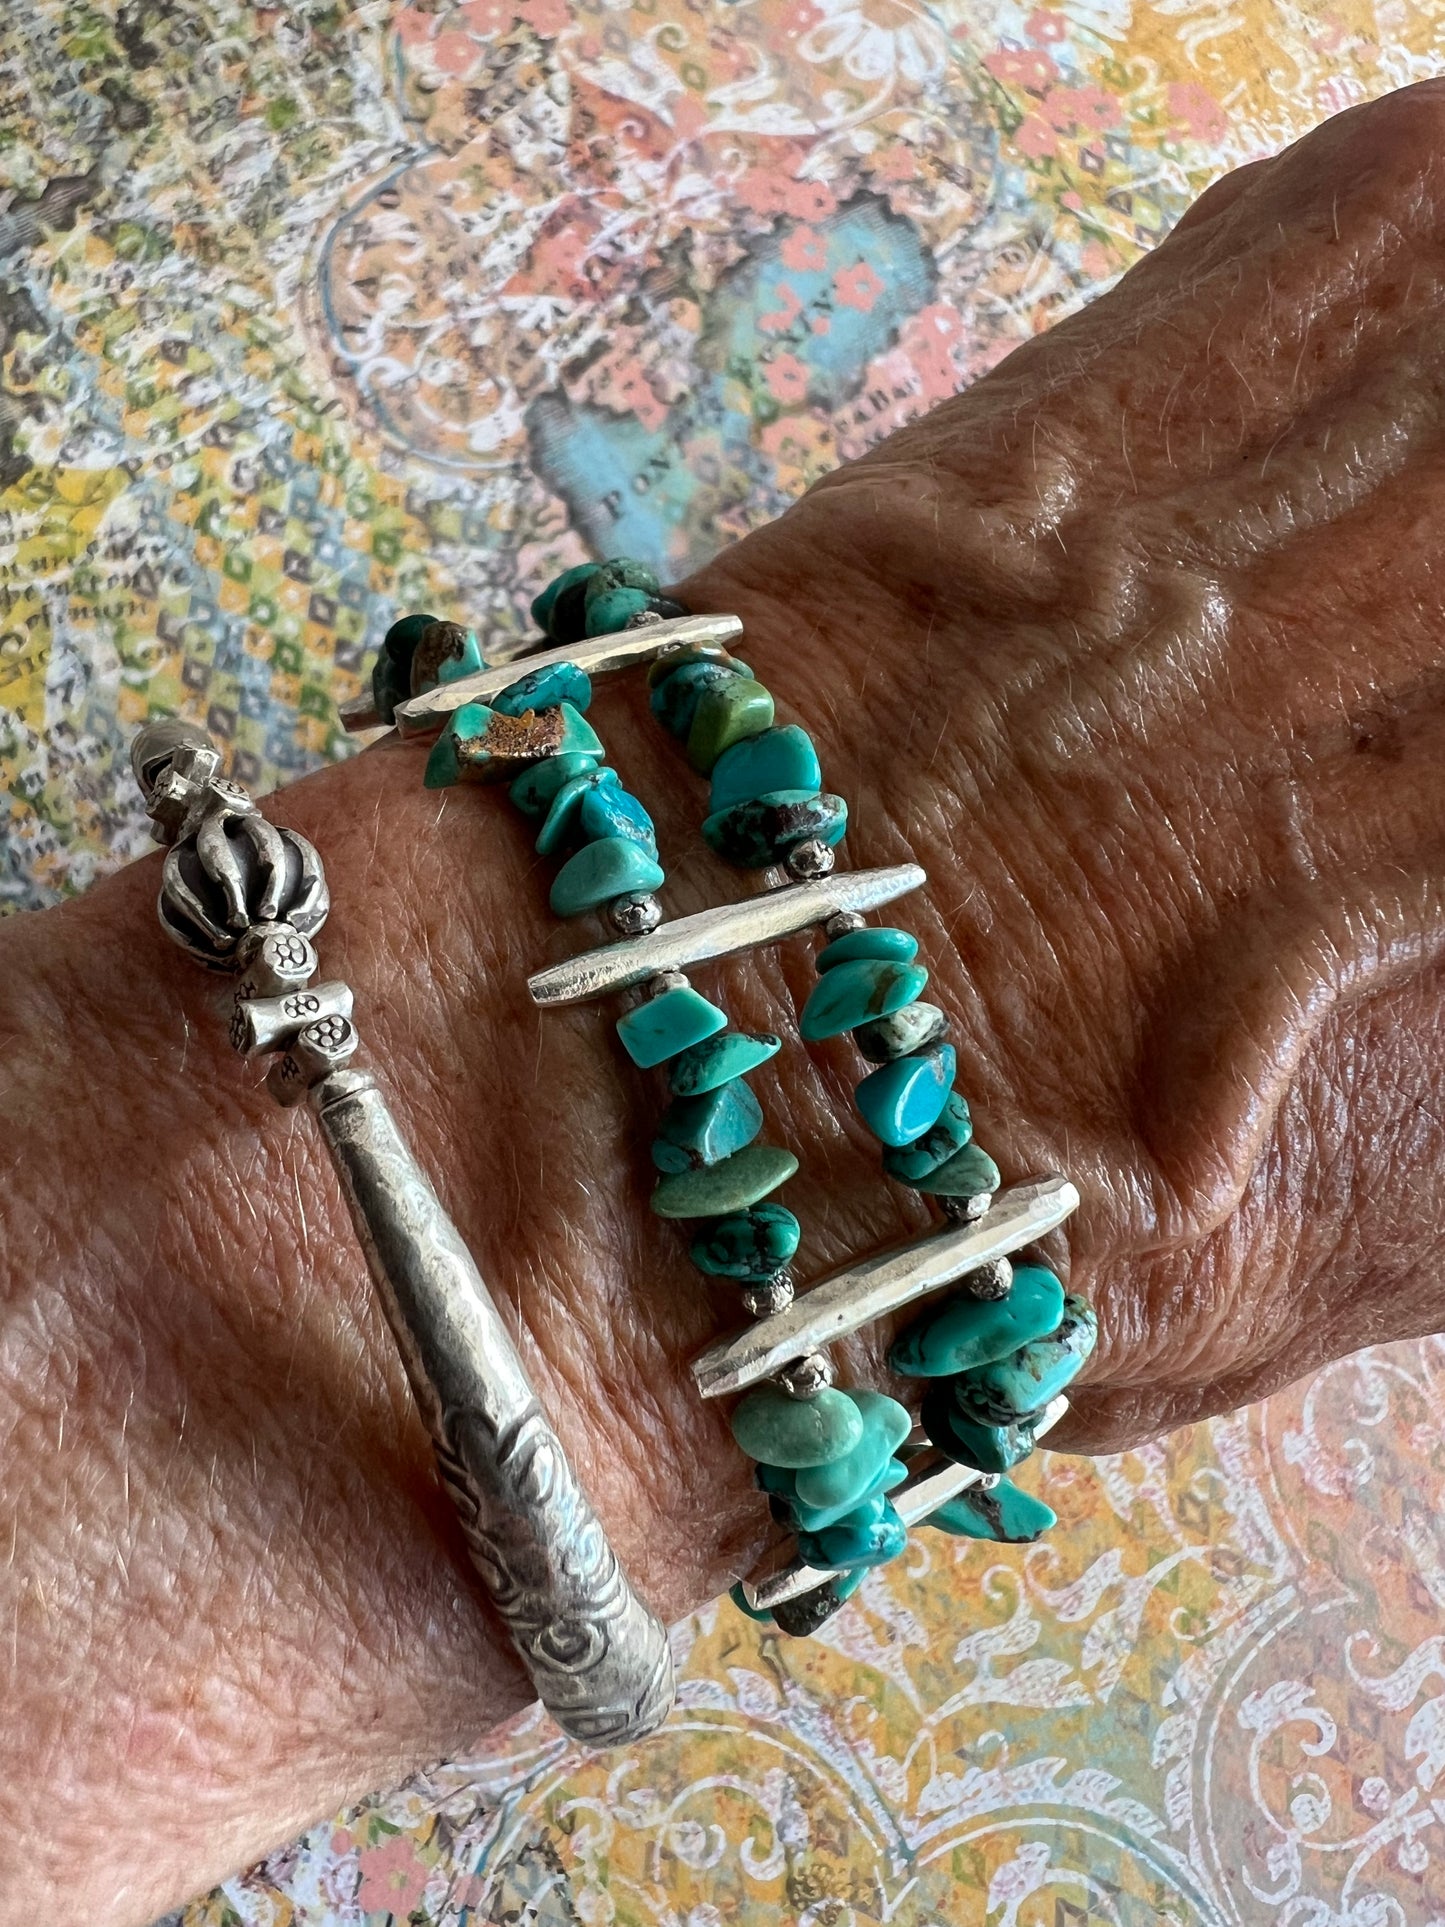 Turquoise and fine silver ladder bracelet. Fits 7-8” wrists.